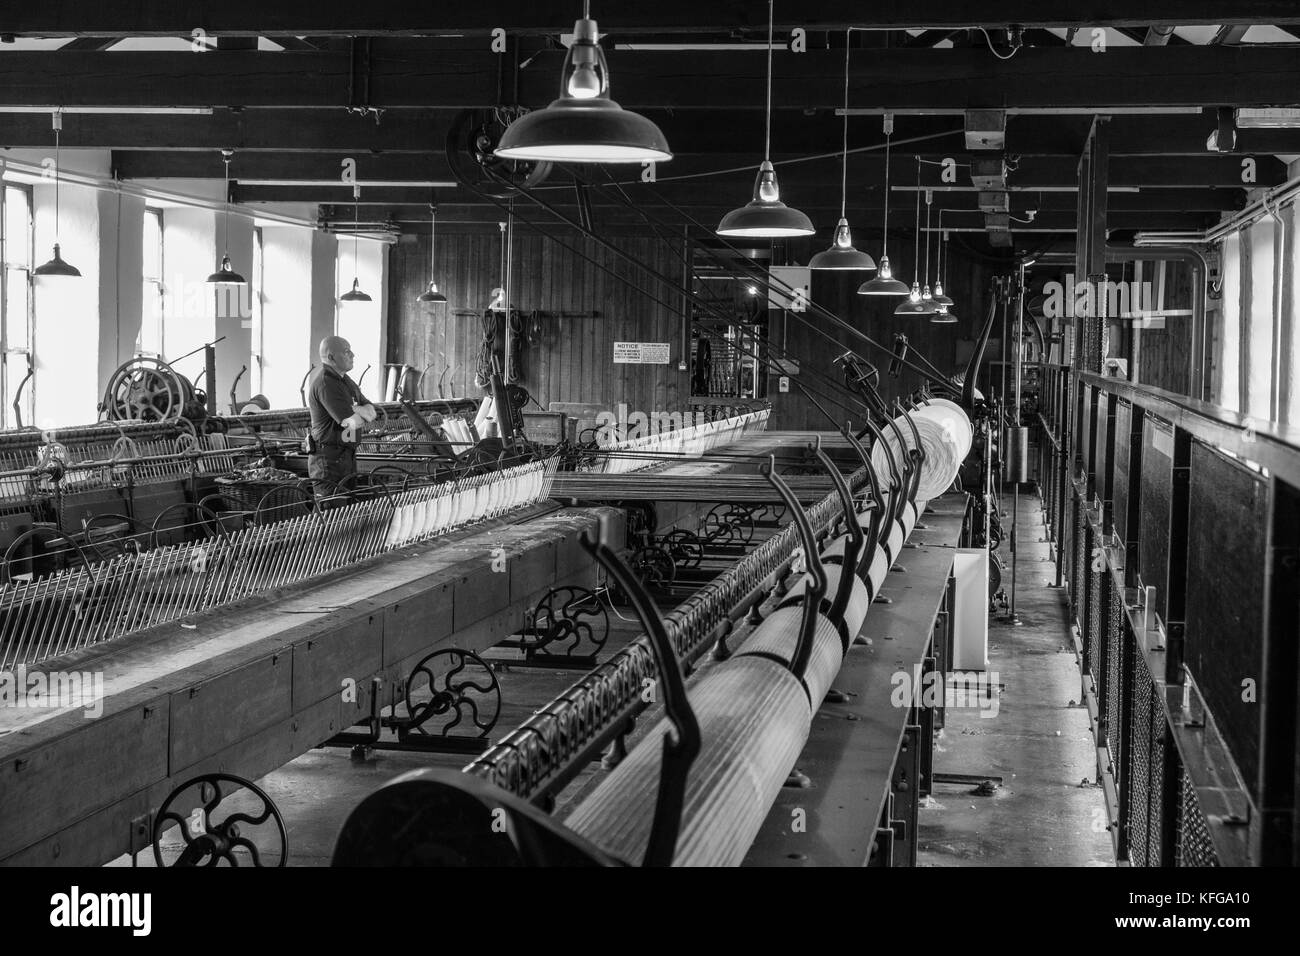 Textile machinery Black and White Stock Photos & Images - Alamy